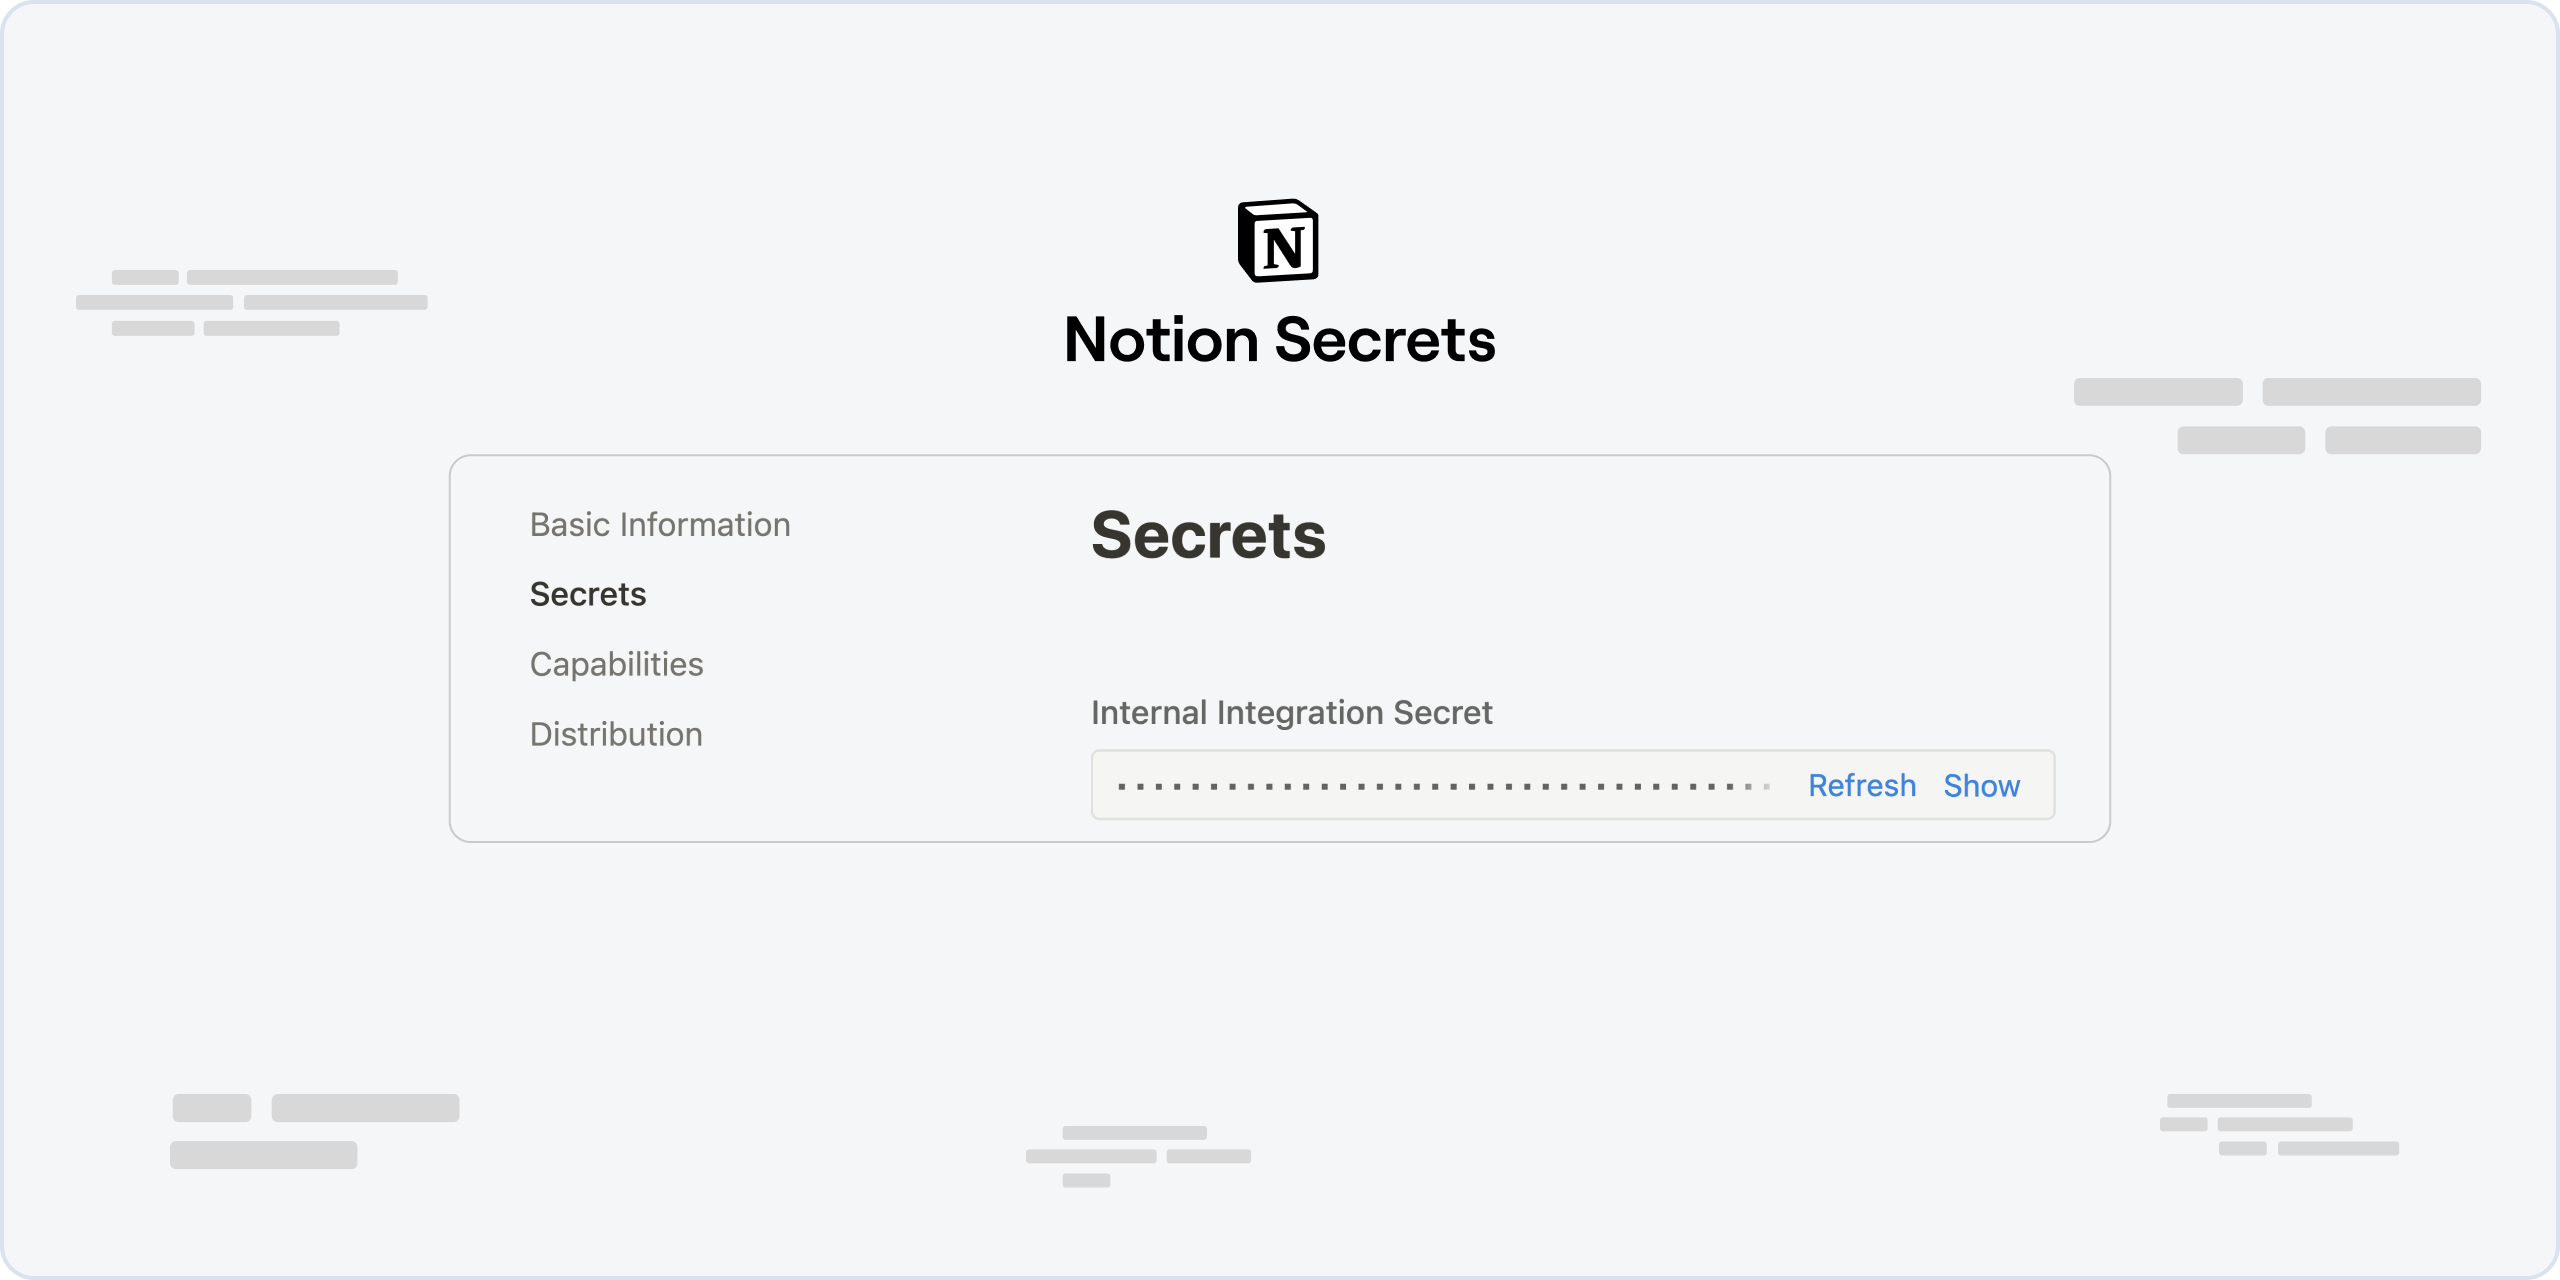 Messaging channel - Notion